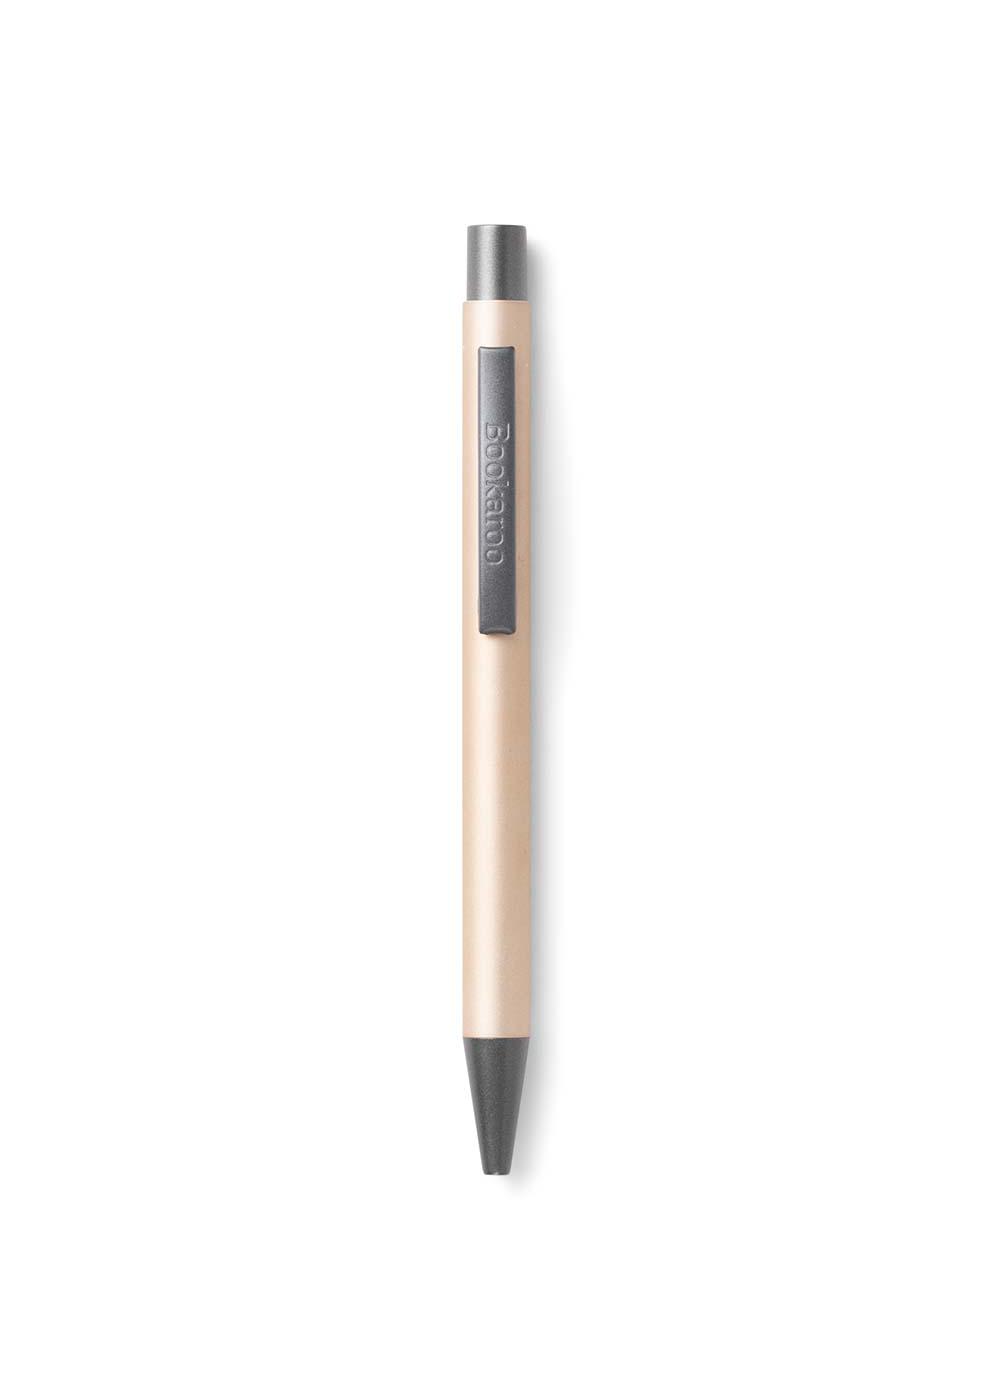 Bookaroo Gold Retractable Ball Point Pen - Black Ink; image 3 of 3